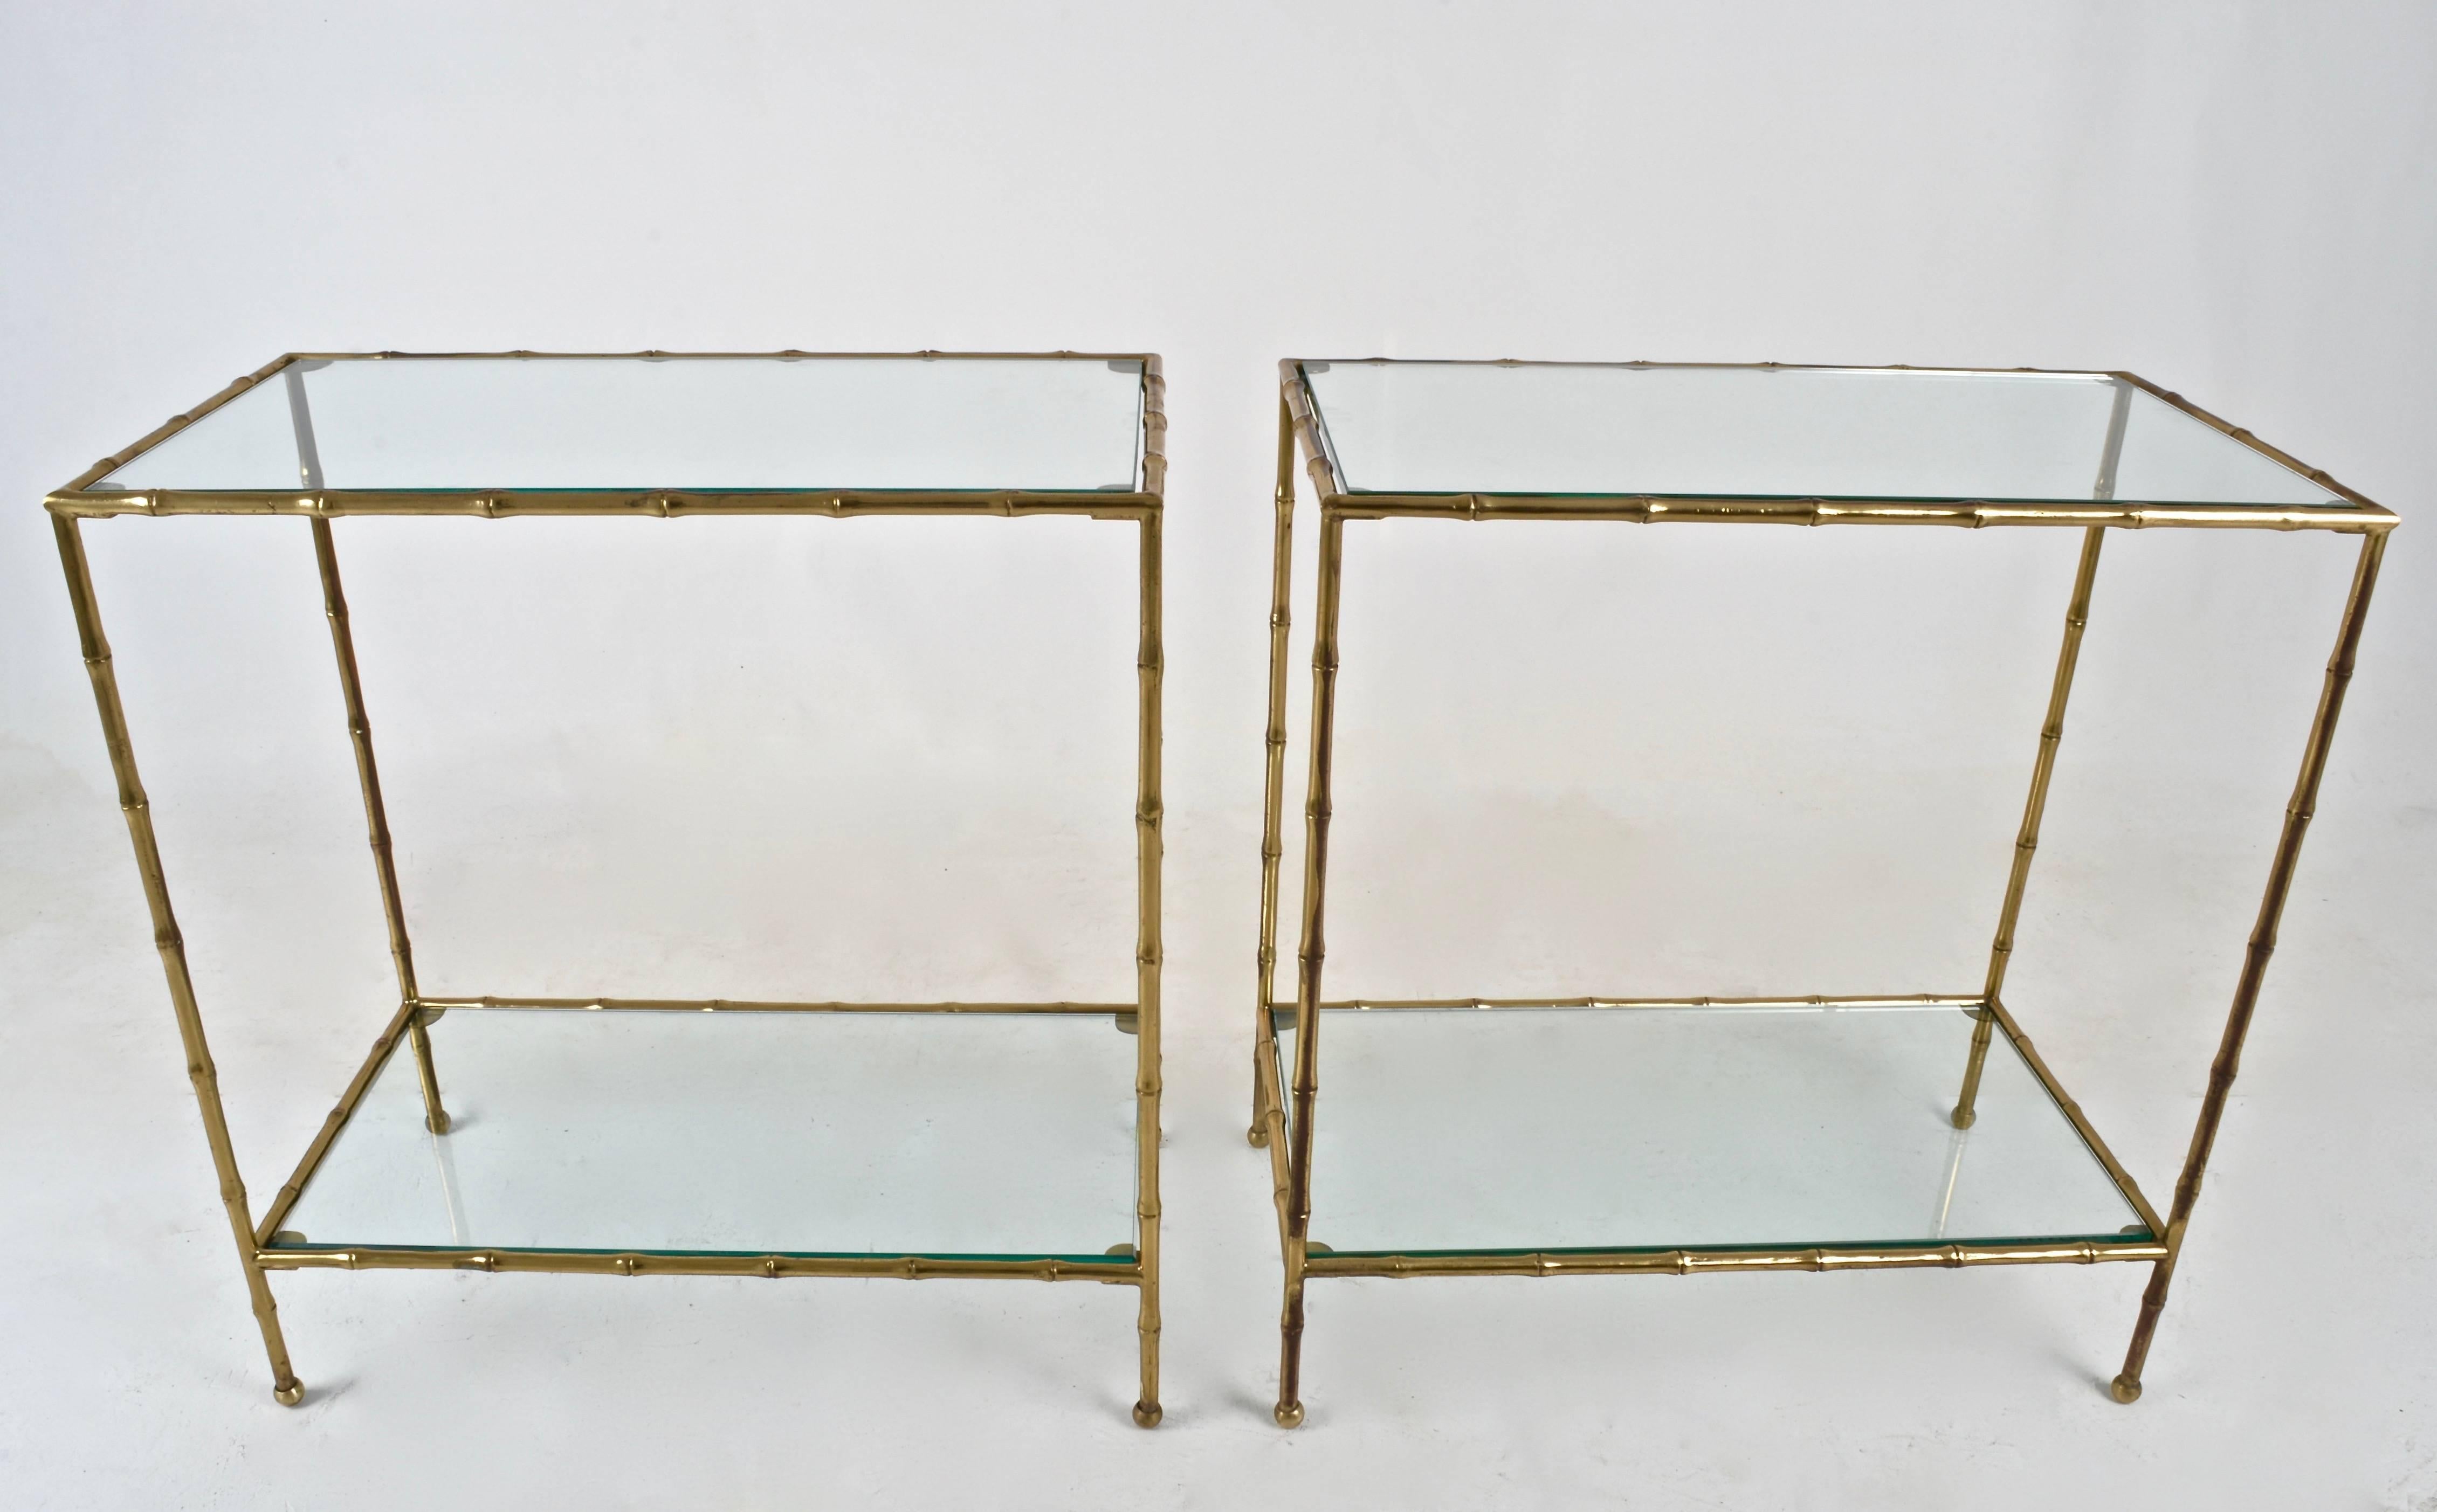 A very nice quality pair of side tables. Solid Bras with heavy glass tops and lower shelf. Small ball feet. Original brass finish has some patina for antique look. Brass may be polished and lacquered.